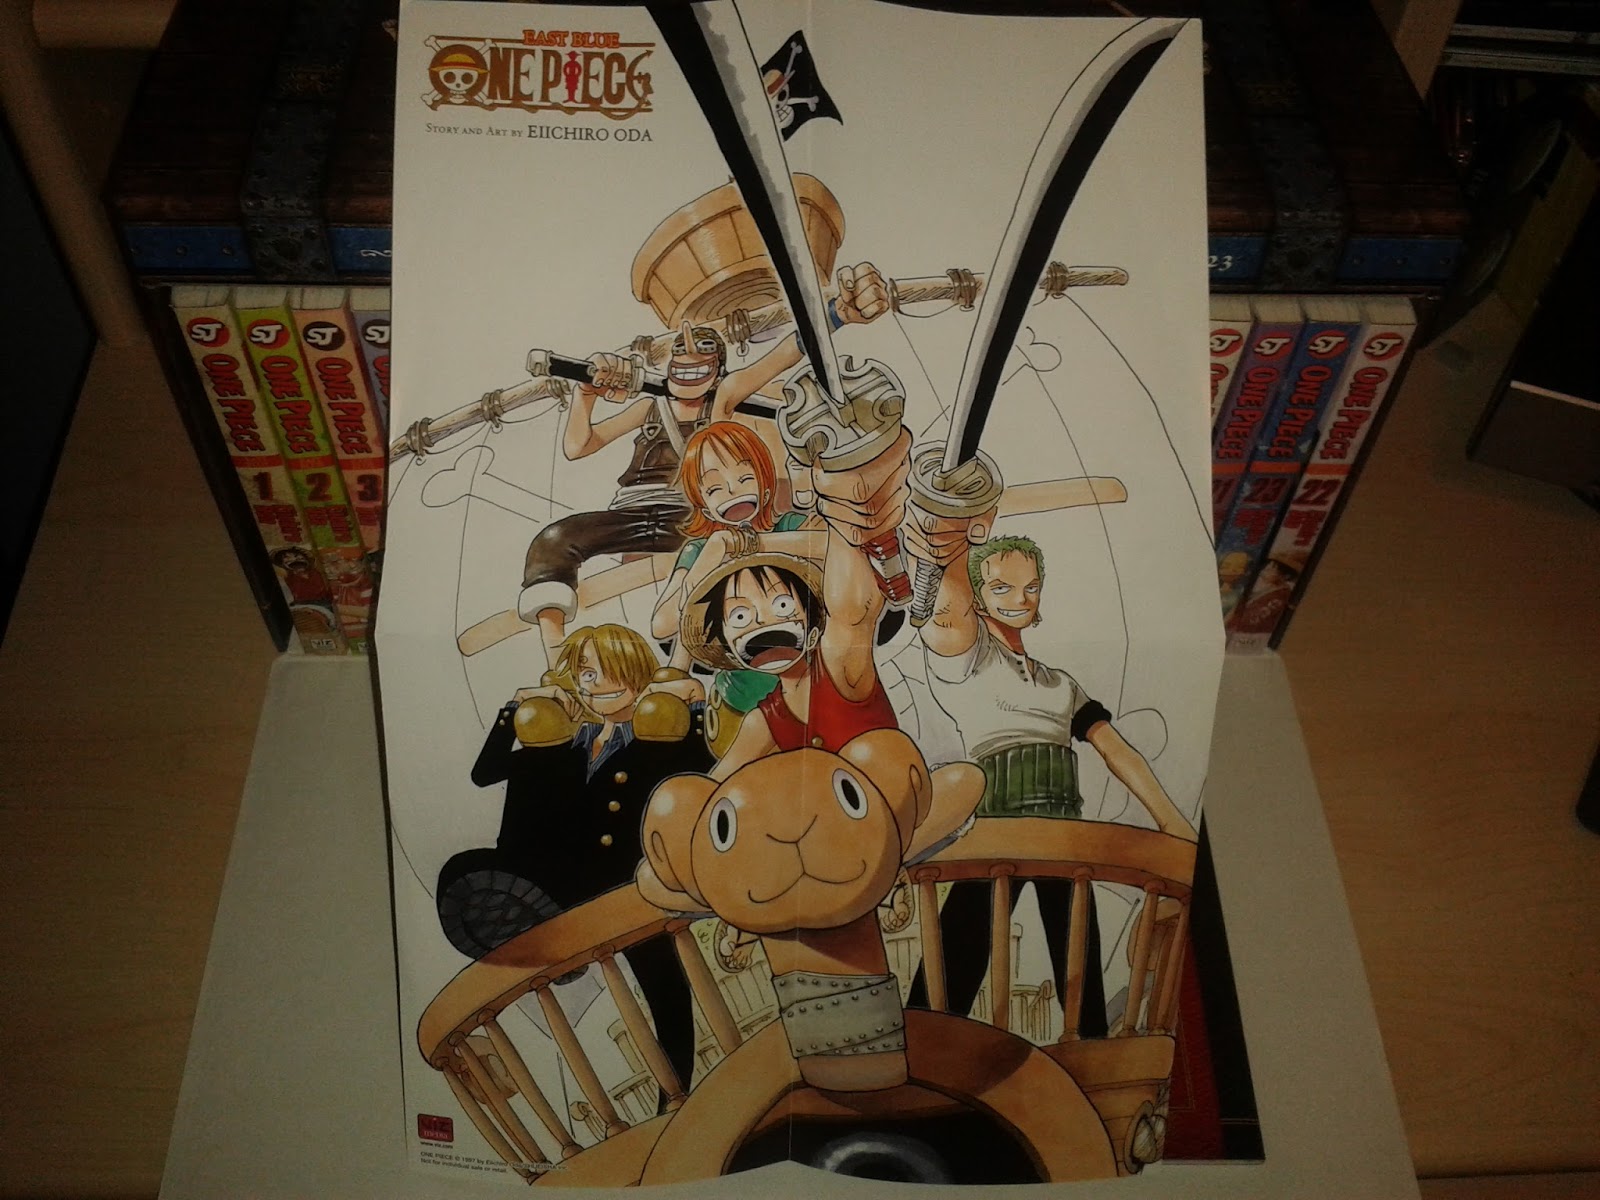 The Normanic Vault: Unboxing/Overview: One Piece Manga Box Sets 1, 2 & 3